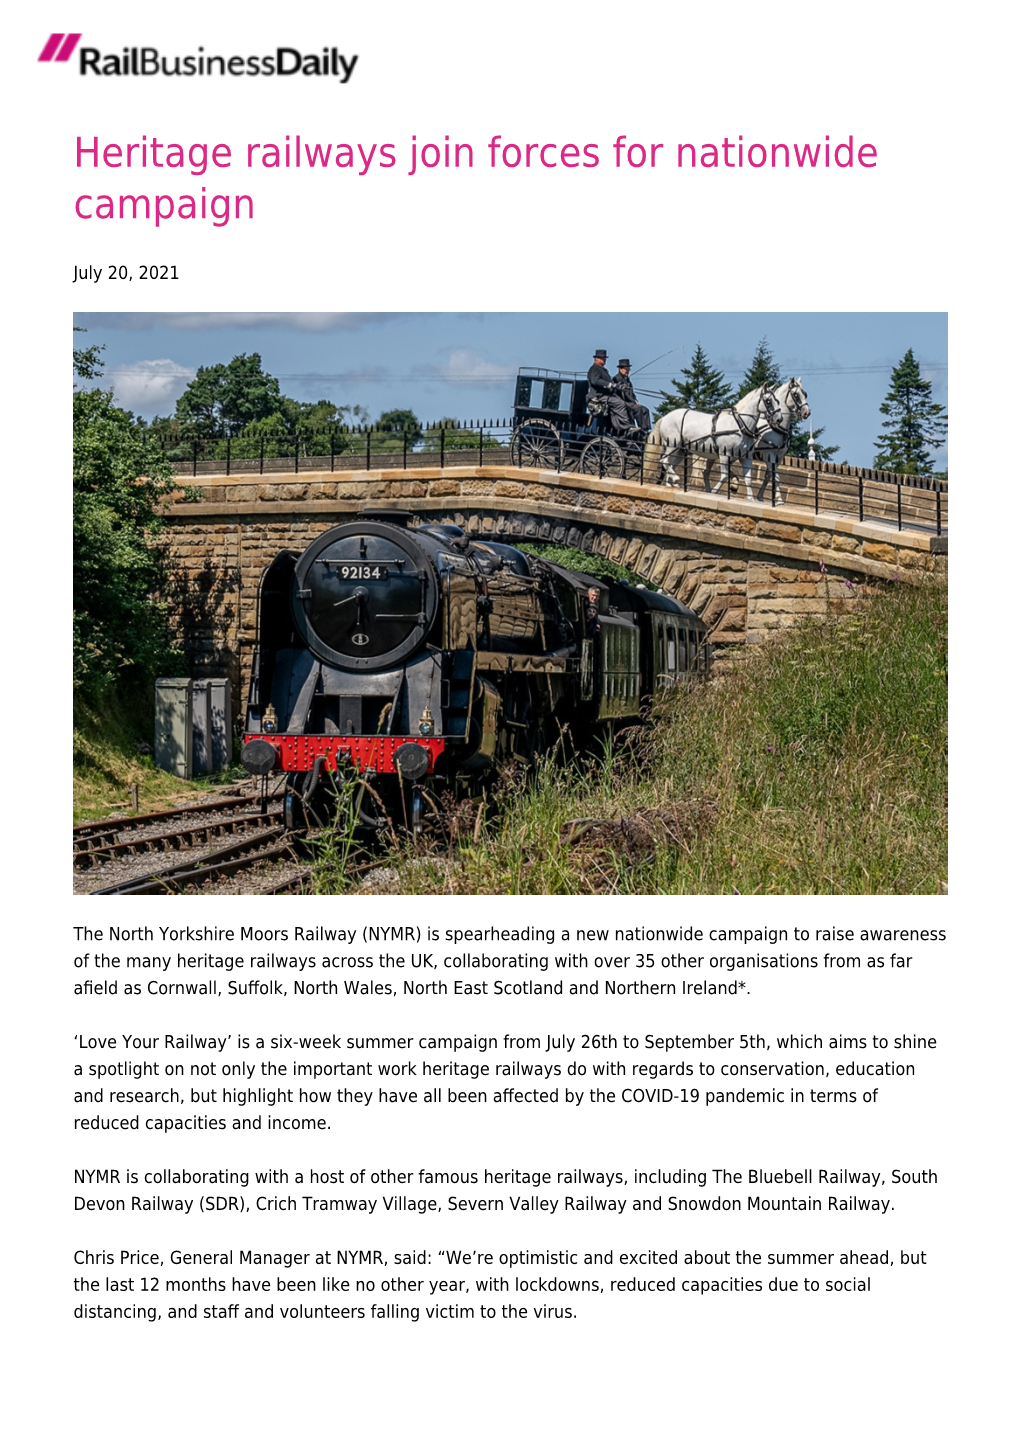 Heritage Railways Join Forces for Nationwide Campaign